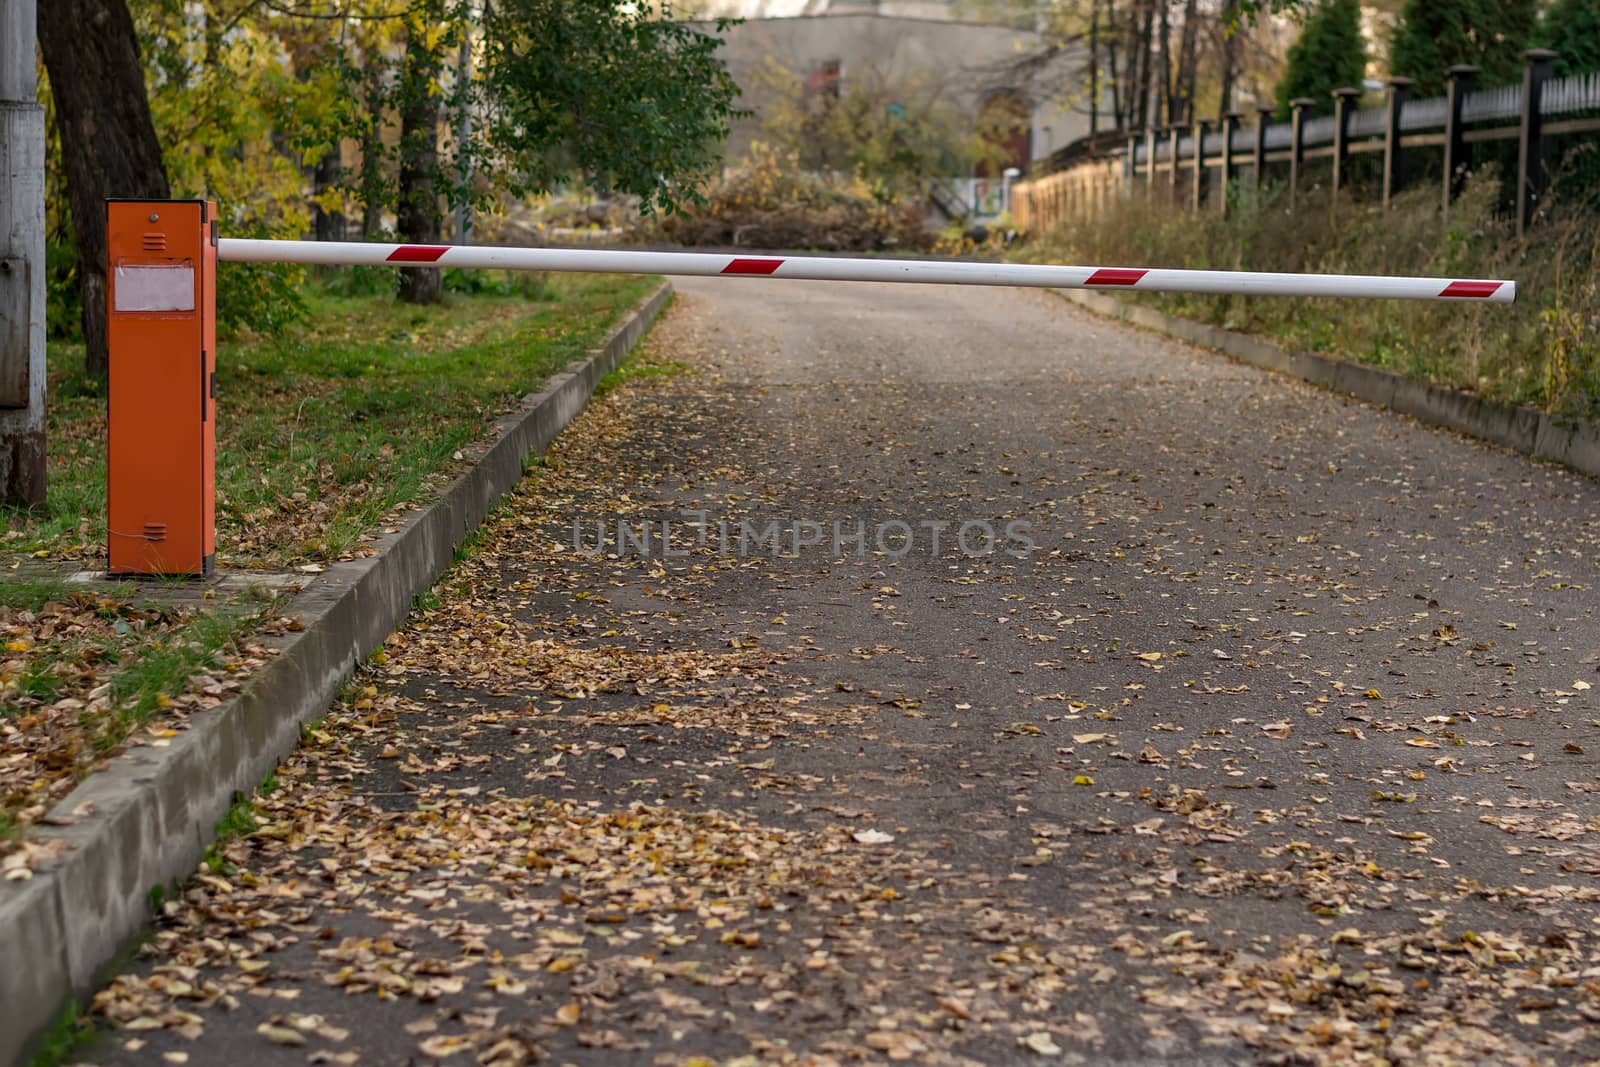 the barrier on the road leading to the building on the background of fallen autumn leaves